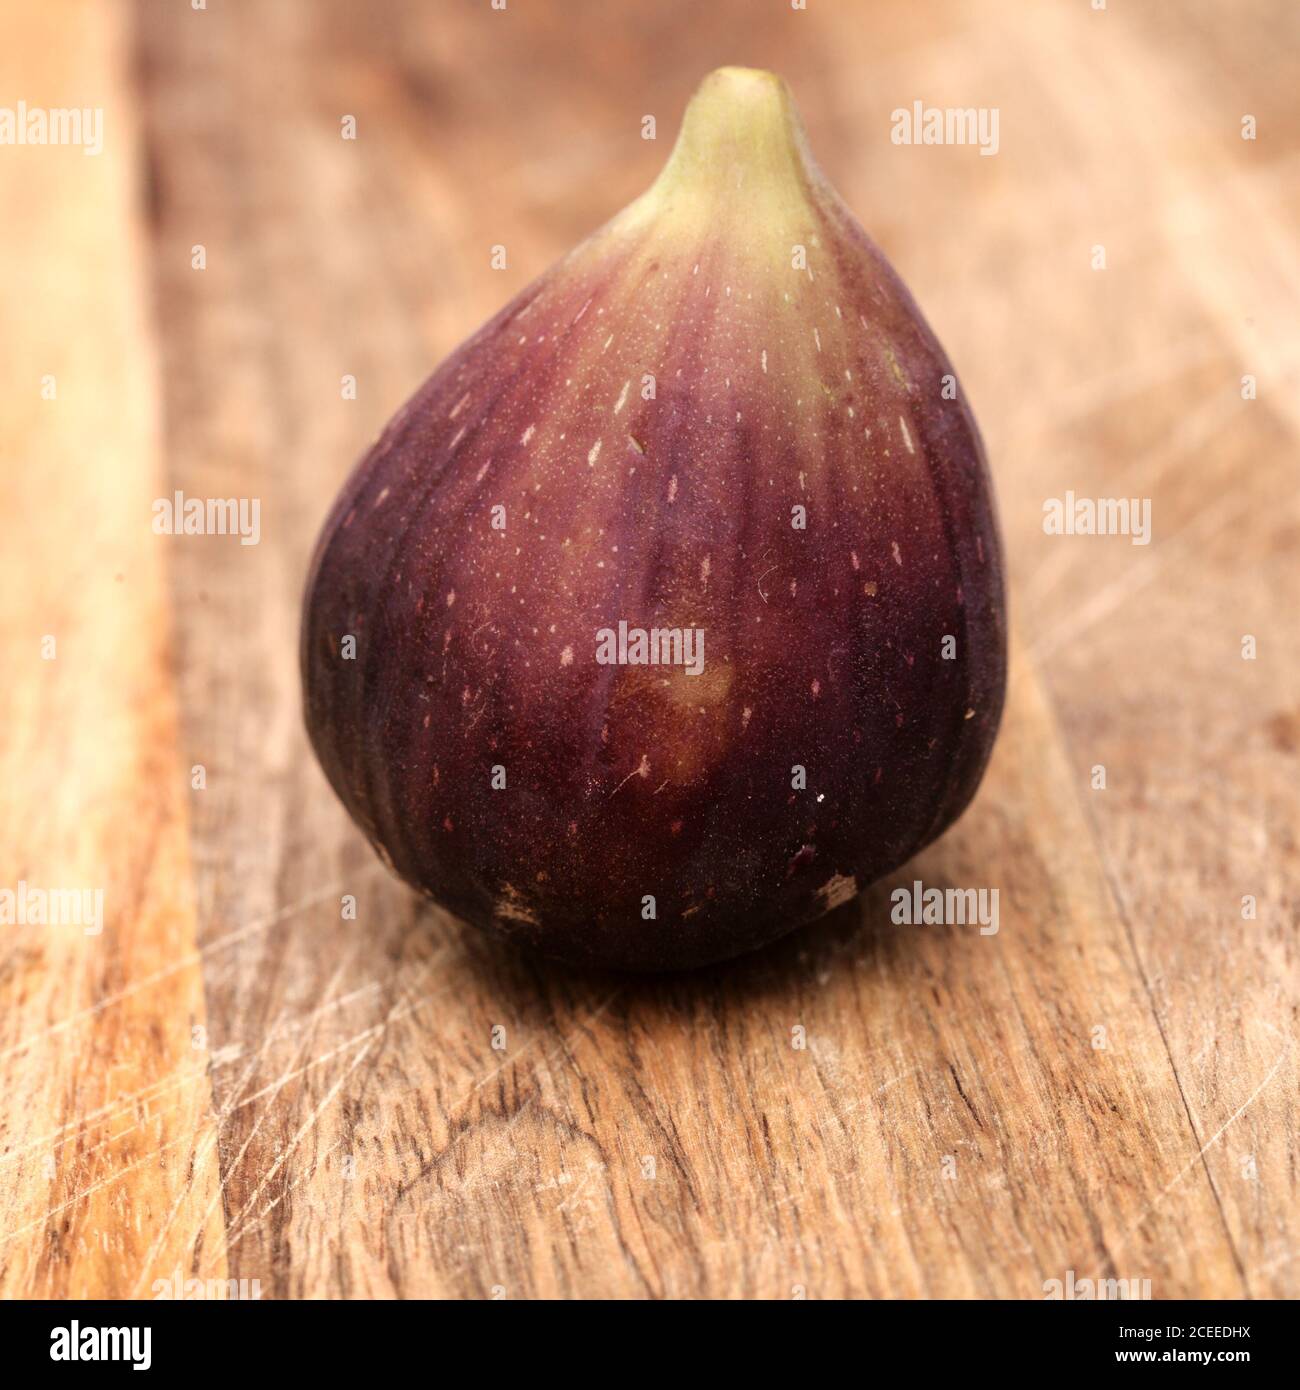 Agriculural produce of Gran Canaria - figs on trivet board Stock Photo